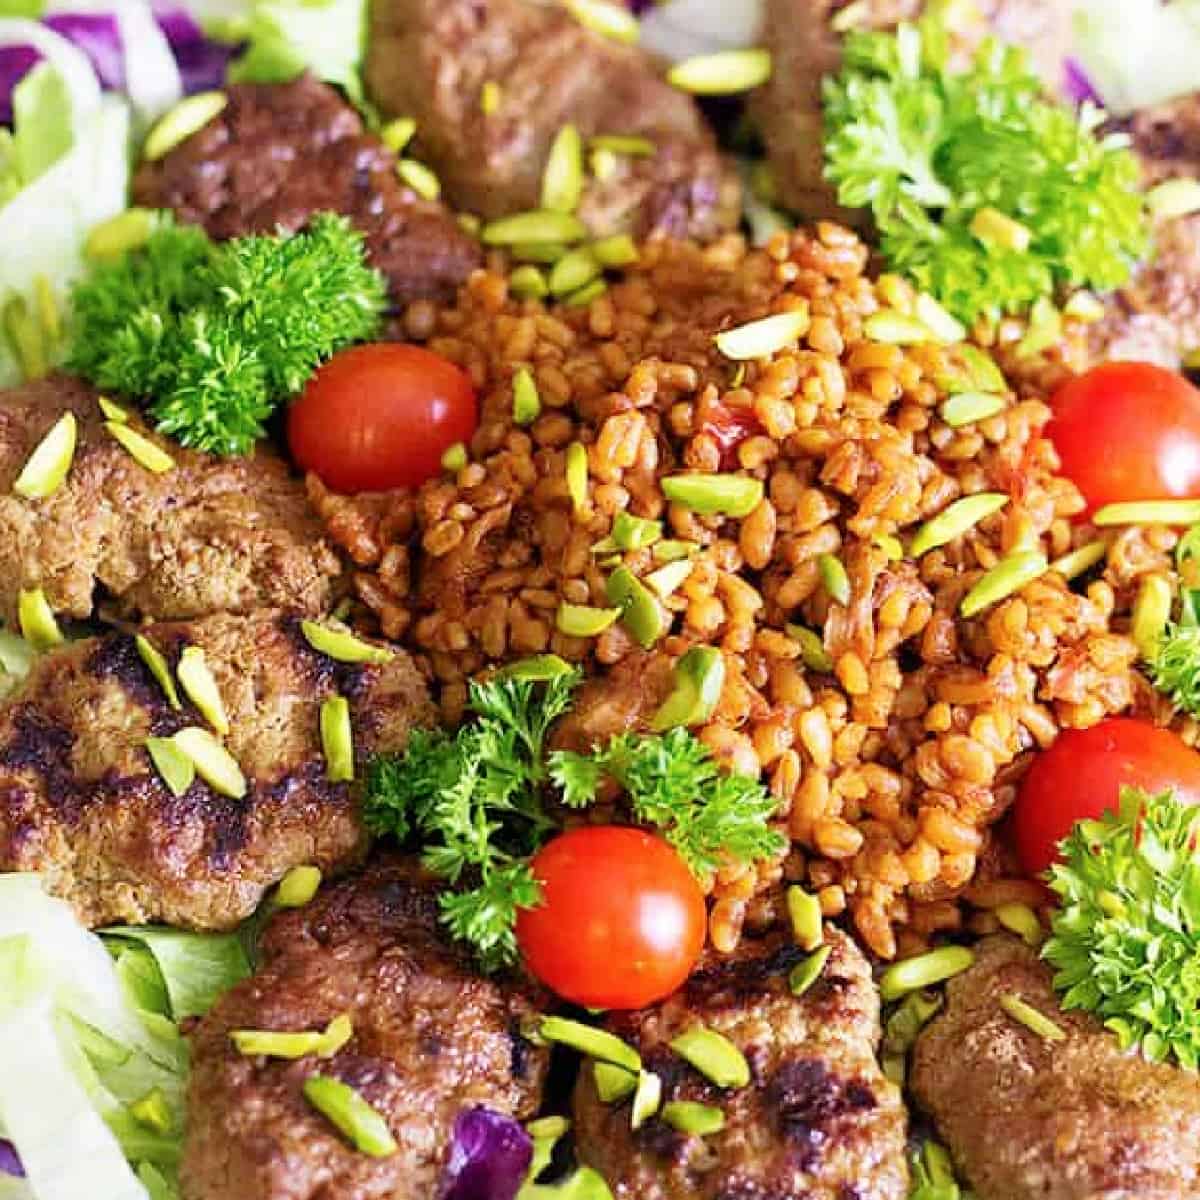 Spice up your usual meals with this Pomegranate Pistachio Koftas with Bulgur. Grilled koftas served with a delicious bulgur make the perfect meal!
